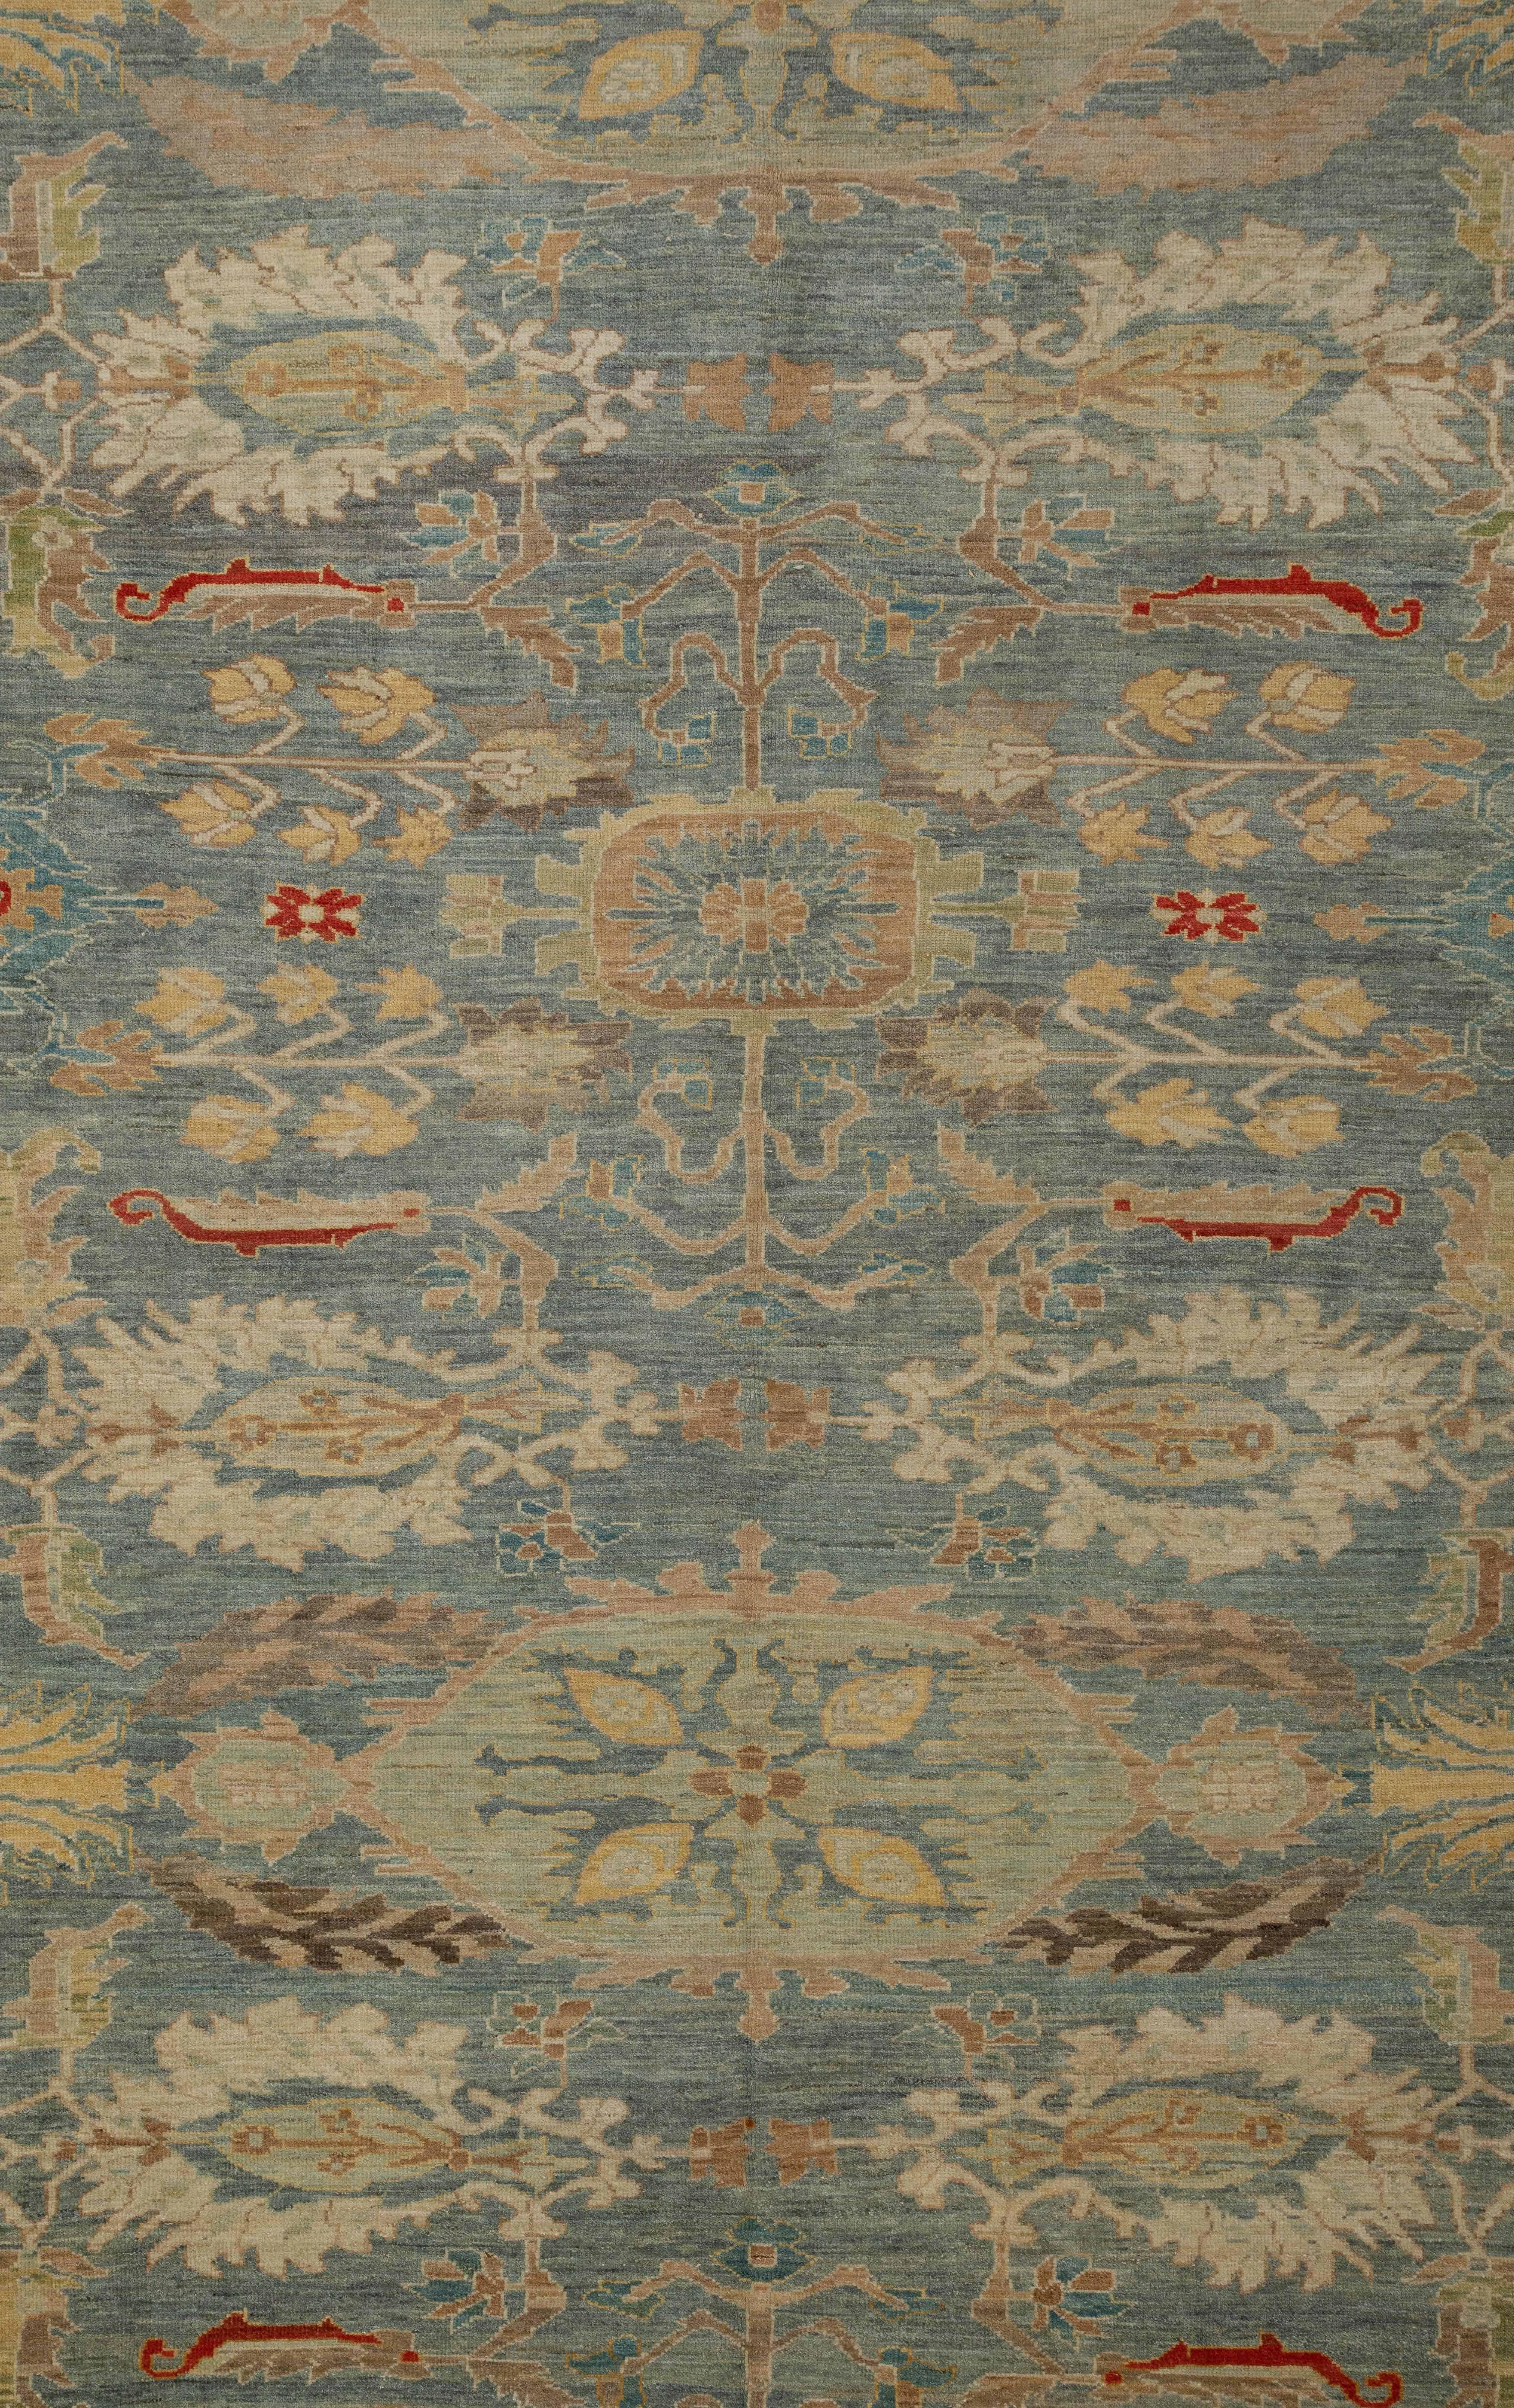 Handmade Turkish area rug from high quality sheep’s wool and colored with eco-friendly vegetable dyes that are proven safe for humans and pets alike. It’s a classic Sultanabad design featuring a beautiful blue field with a colored mix of flowers in